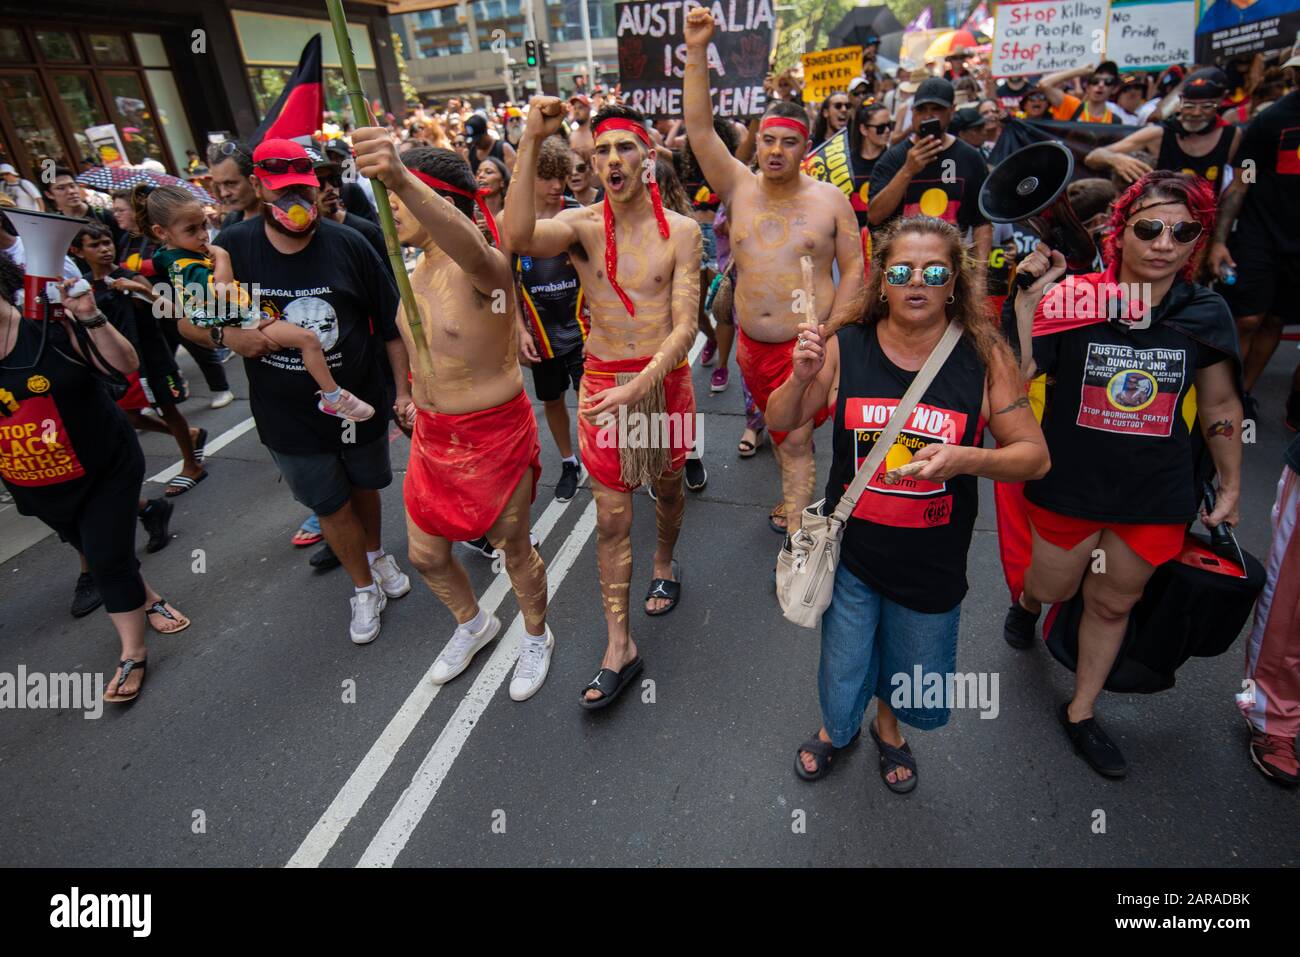 Sydney, NSW, AUSTRALIA - January 26, 2020: Thousands of aboriginal protesters in Hyde Park Sydney ask the government to change Australia Day date. Stock Photo